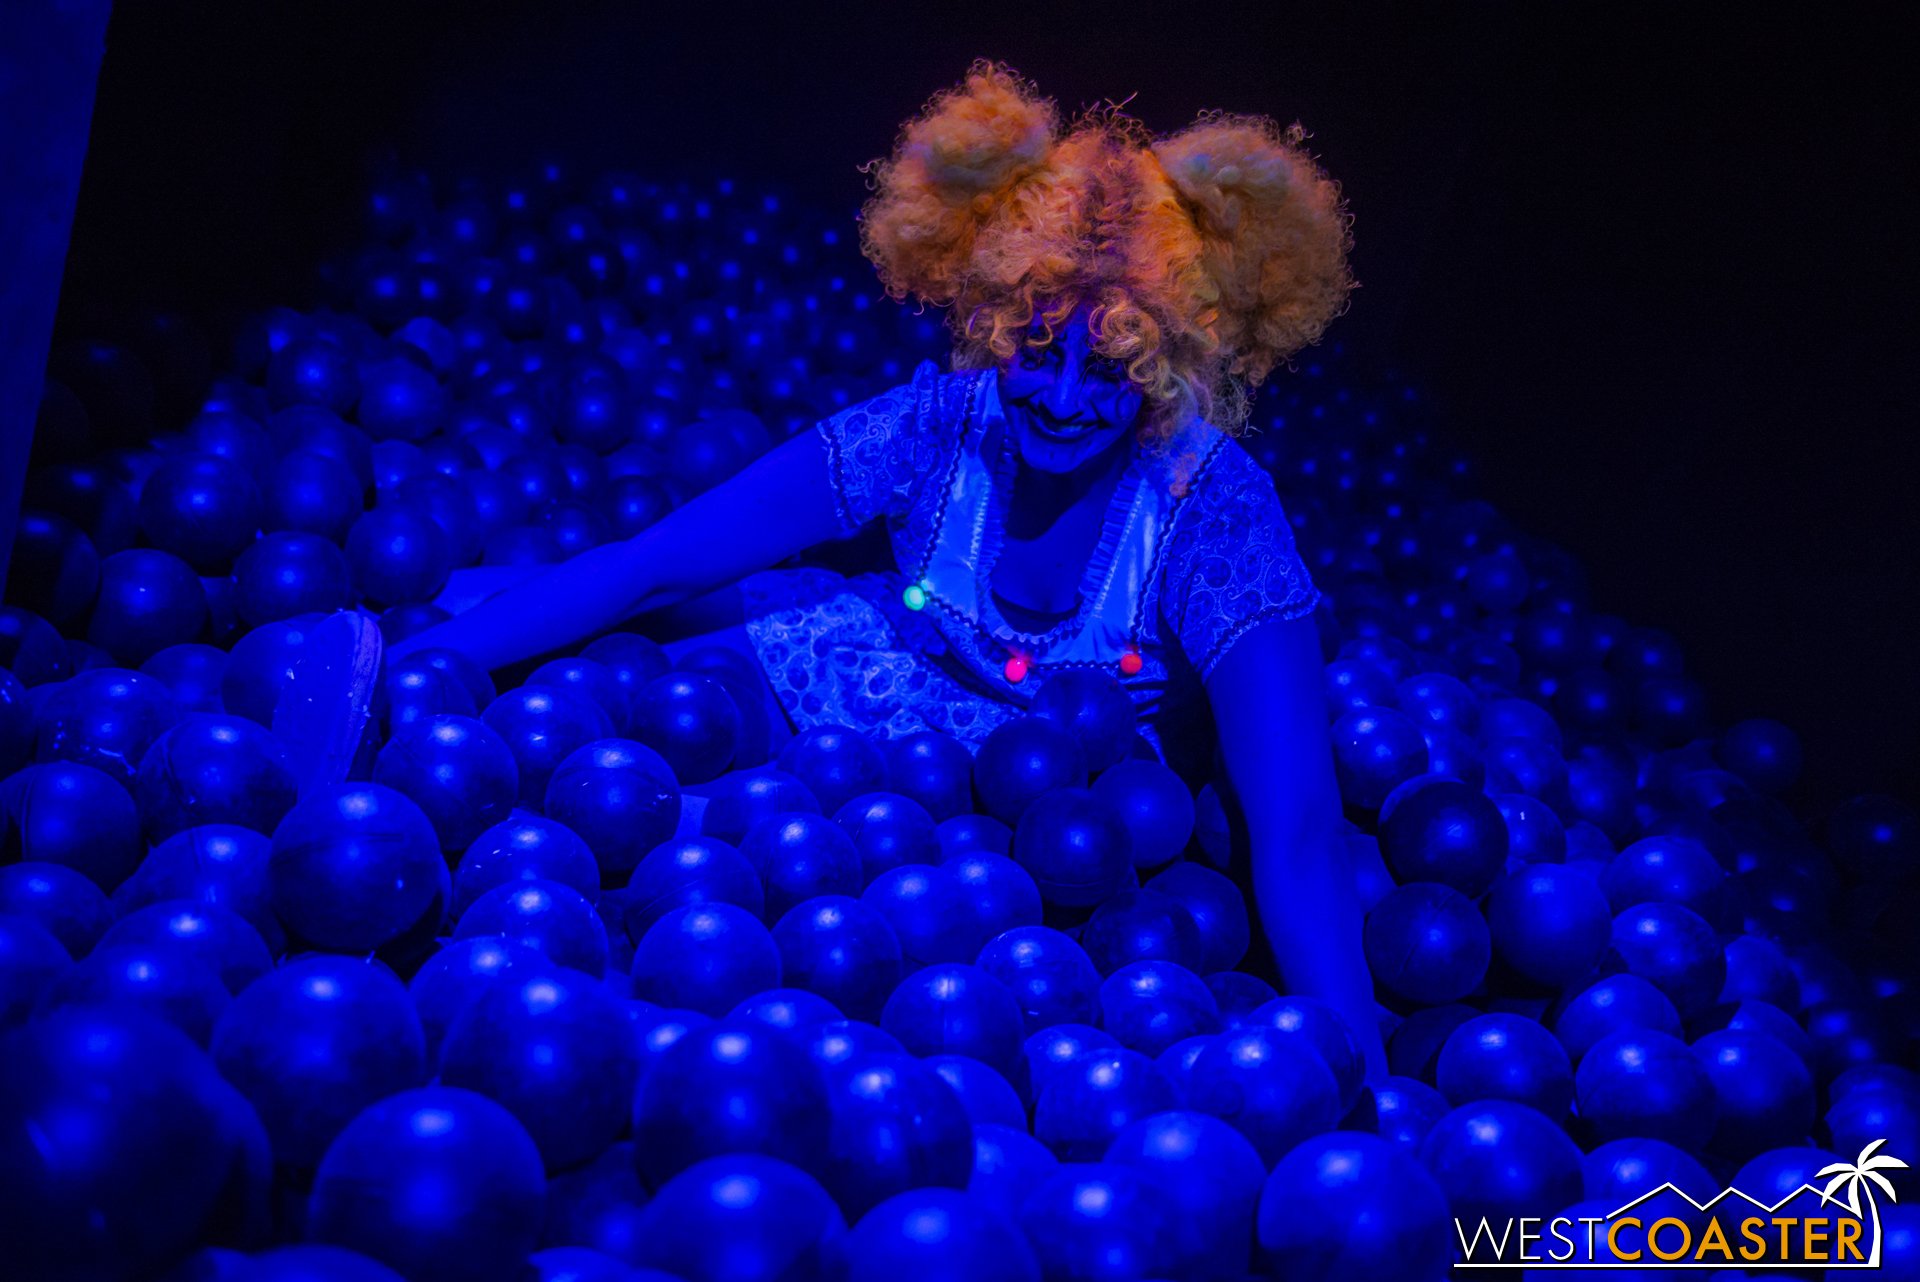  The ball pit room is back at Circus this year, but you have to find it! 